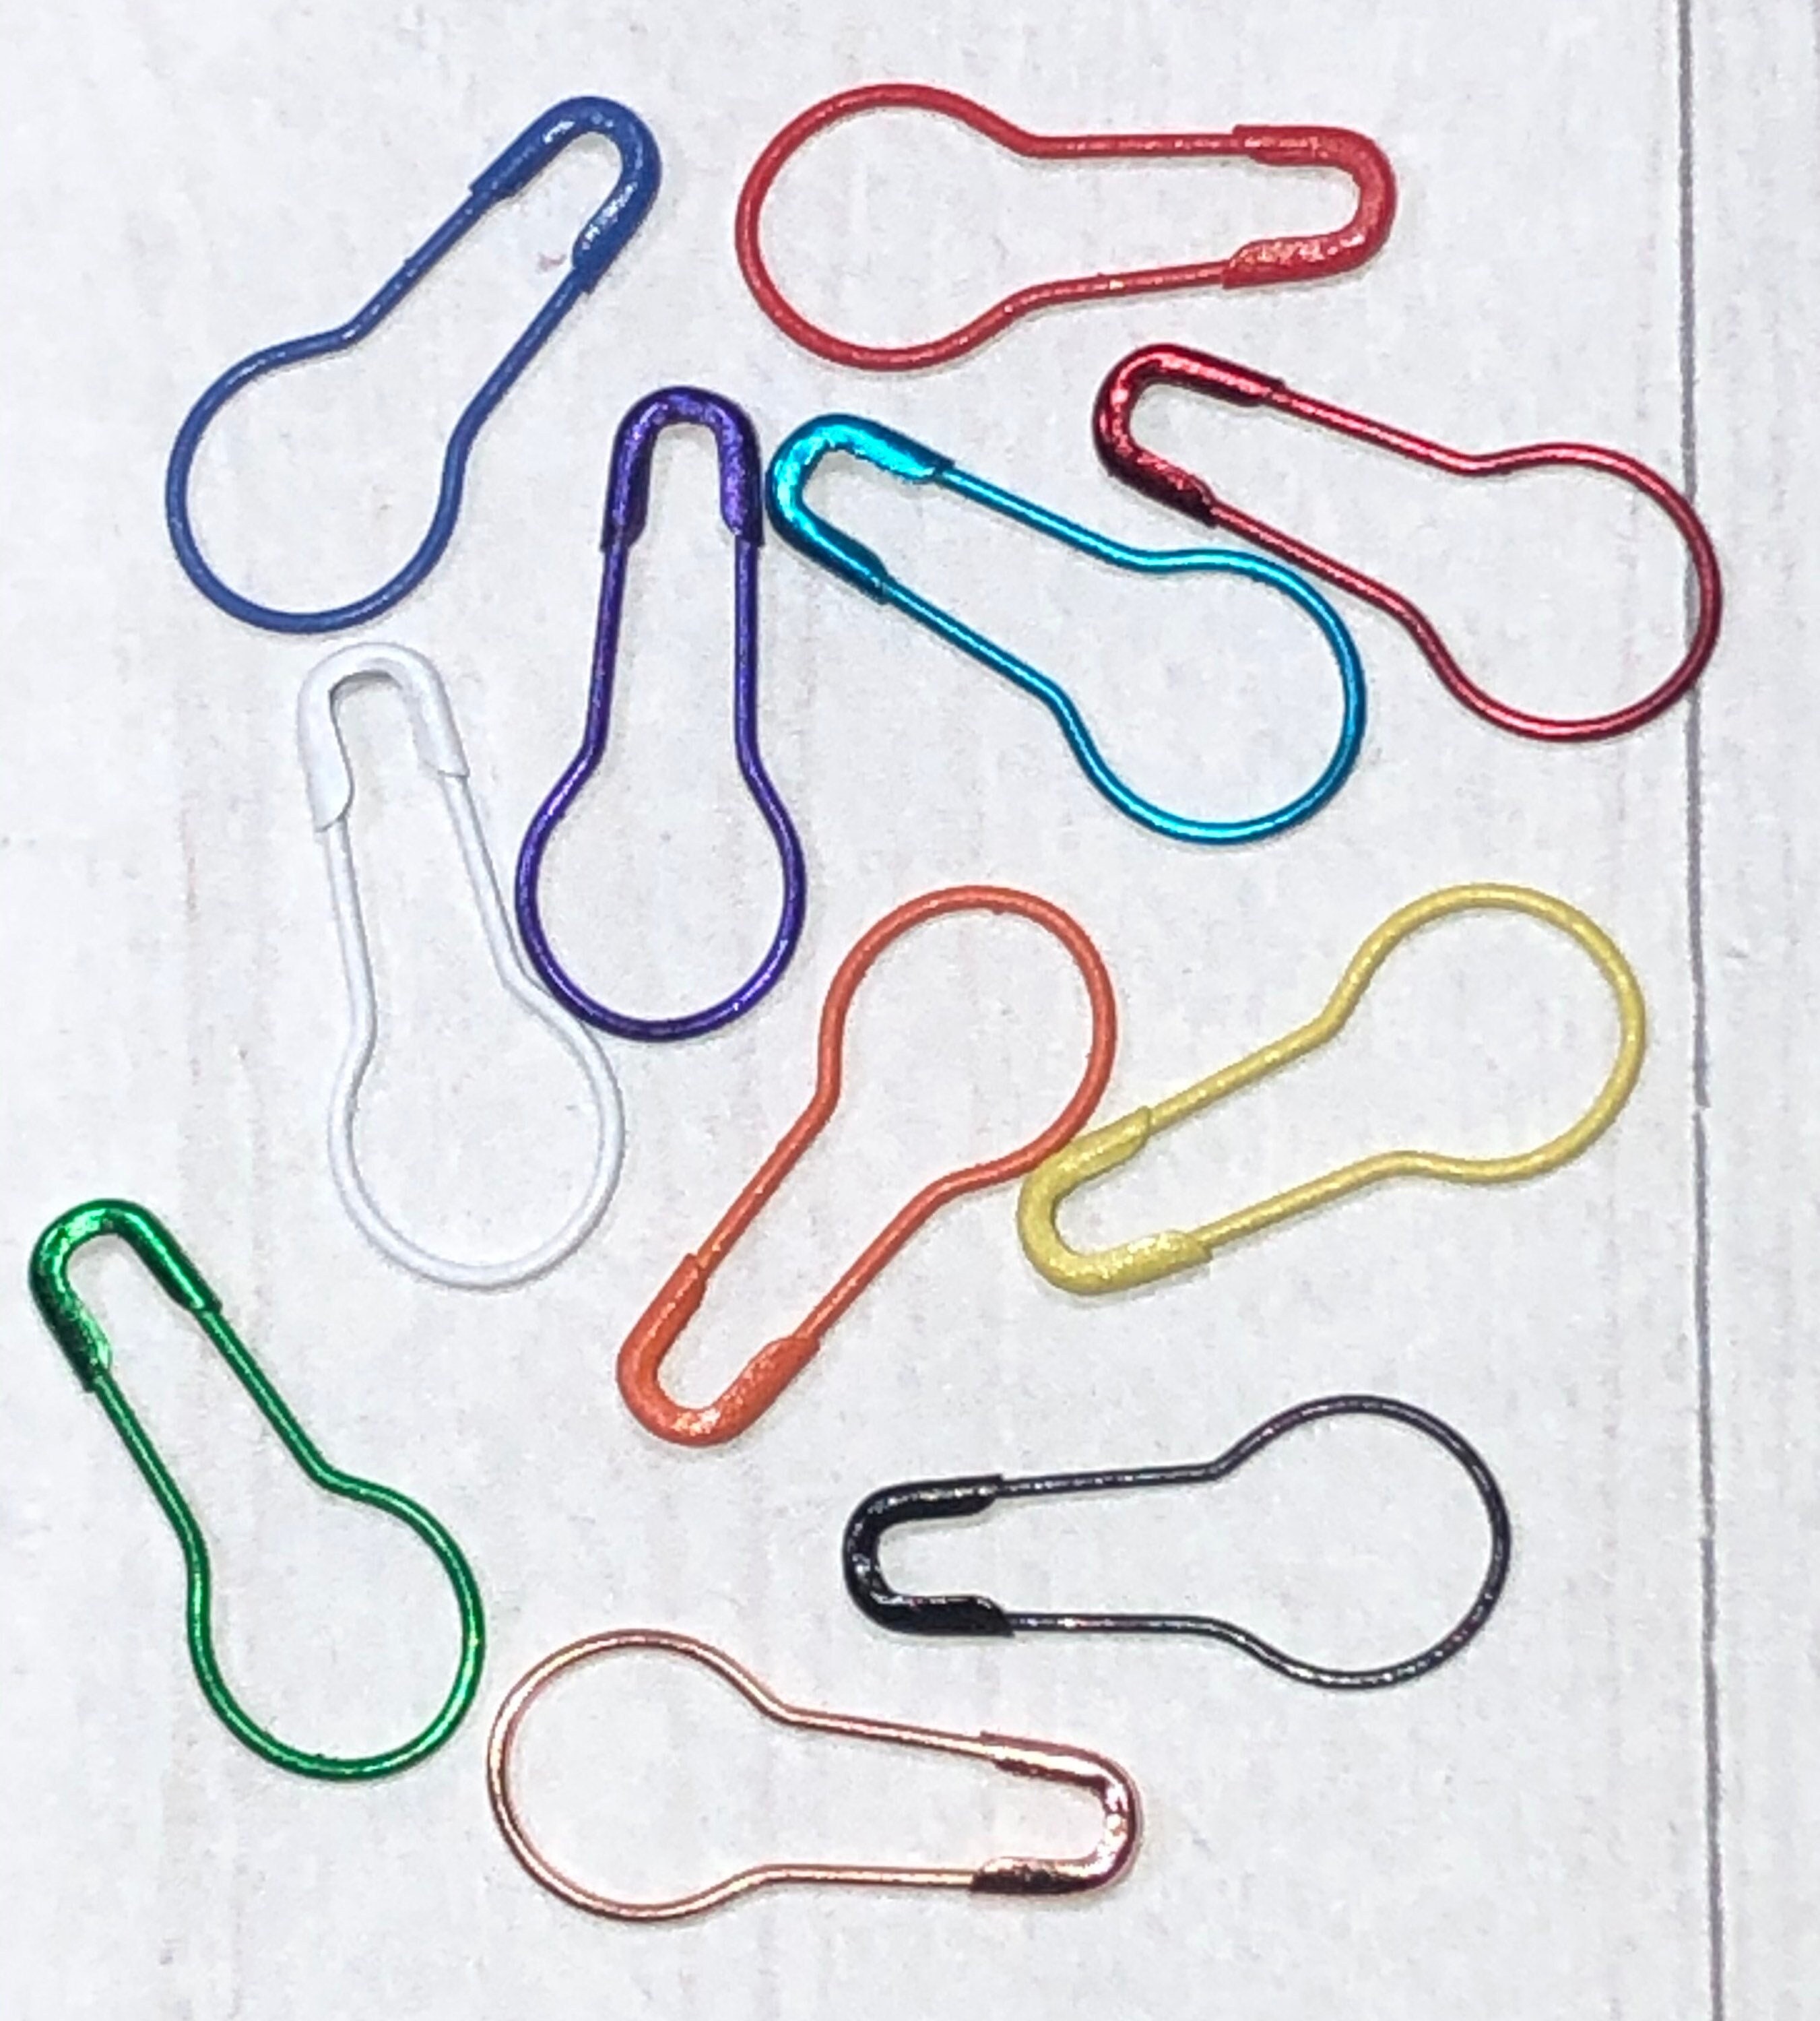 Black Safety Pins Pear Shaped, Pack of 50/100, Craft Supplies, Supplies,  Safety Pins 